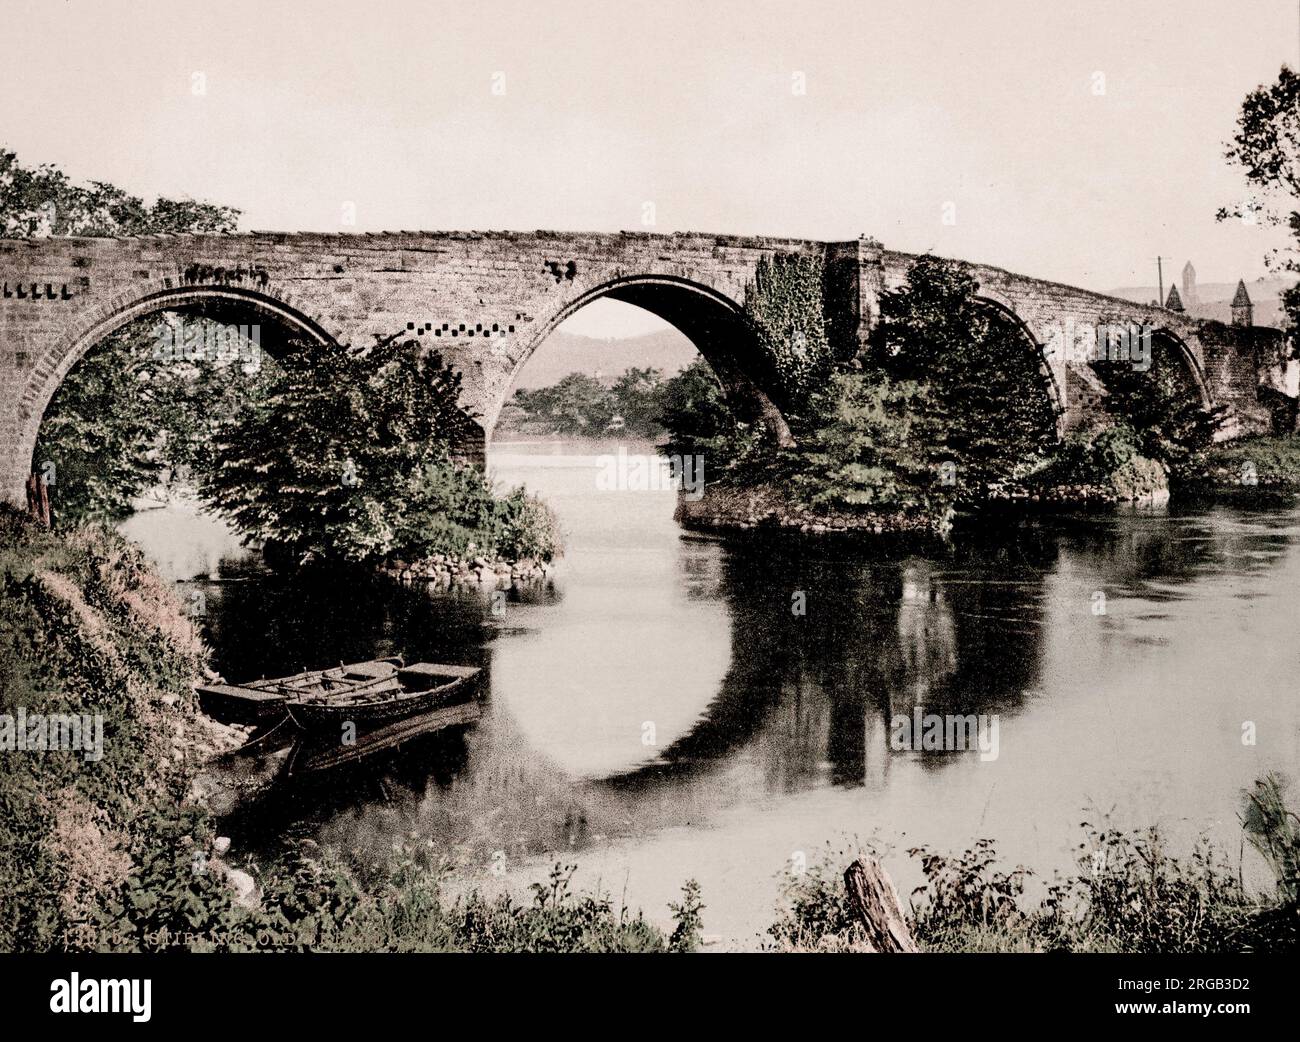 Vintage 19th century / 1900 photograph: Stirling Old Bridge is a stone bridge which crosses the River Forth, Scotland. Stock Photo